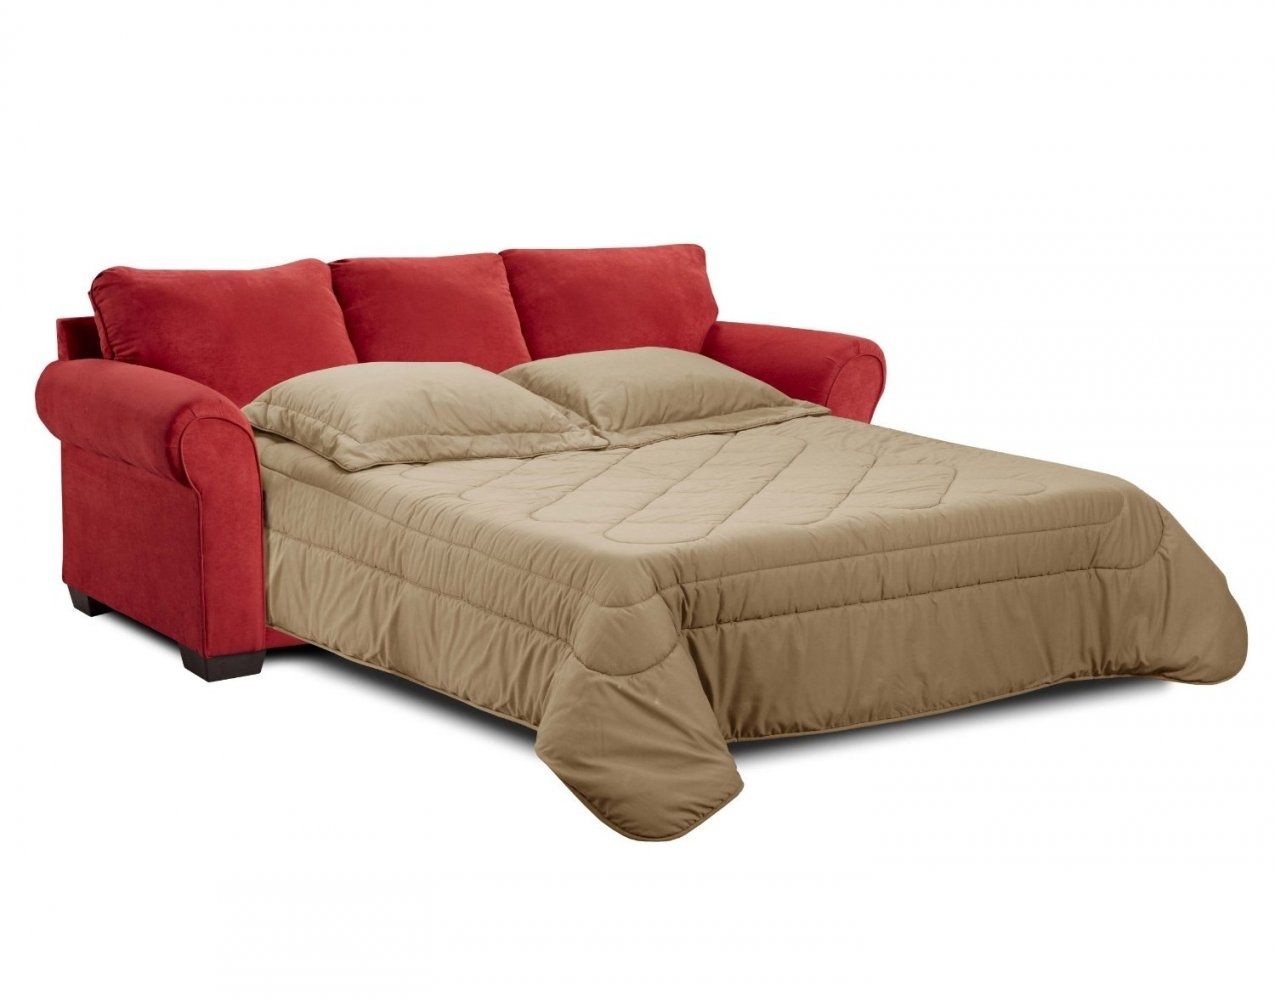 Queen Size Sleeper Sofa 98 On Sofa Room Ideas With Queen Intended Pertaining To Queen Size Sofas (View 2 of 10)